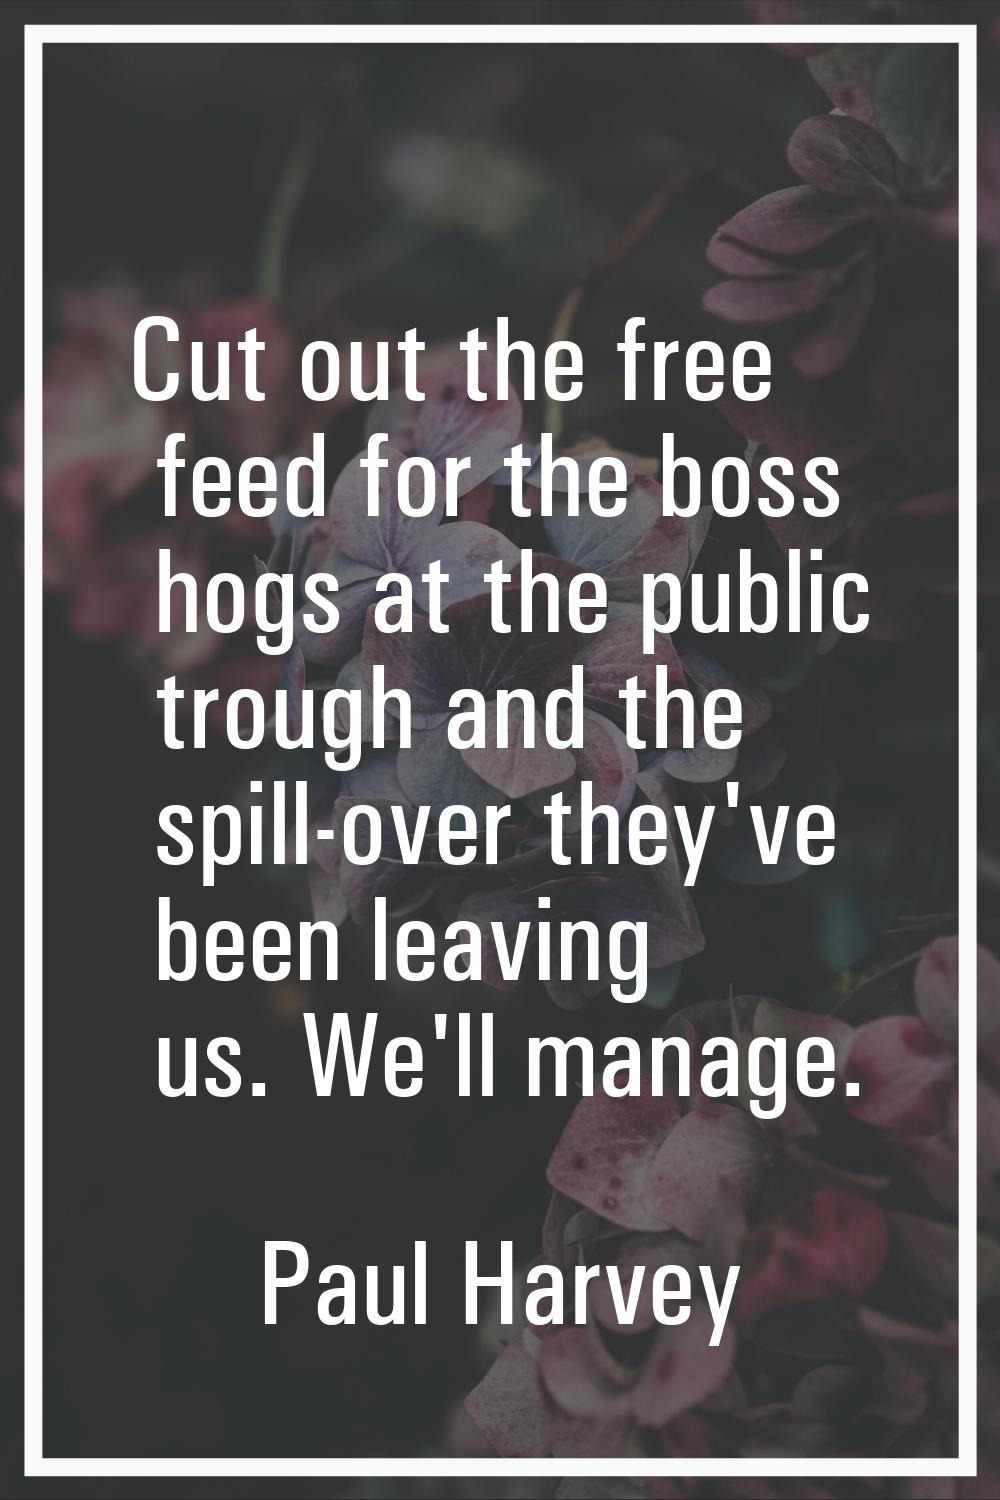 Cut out the free feed for the boss hogs at the public trough and the spill-over they've been leavin